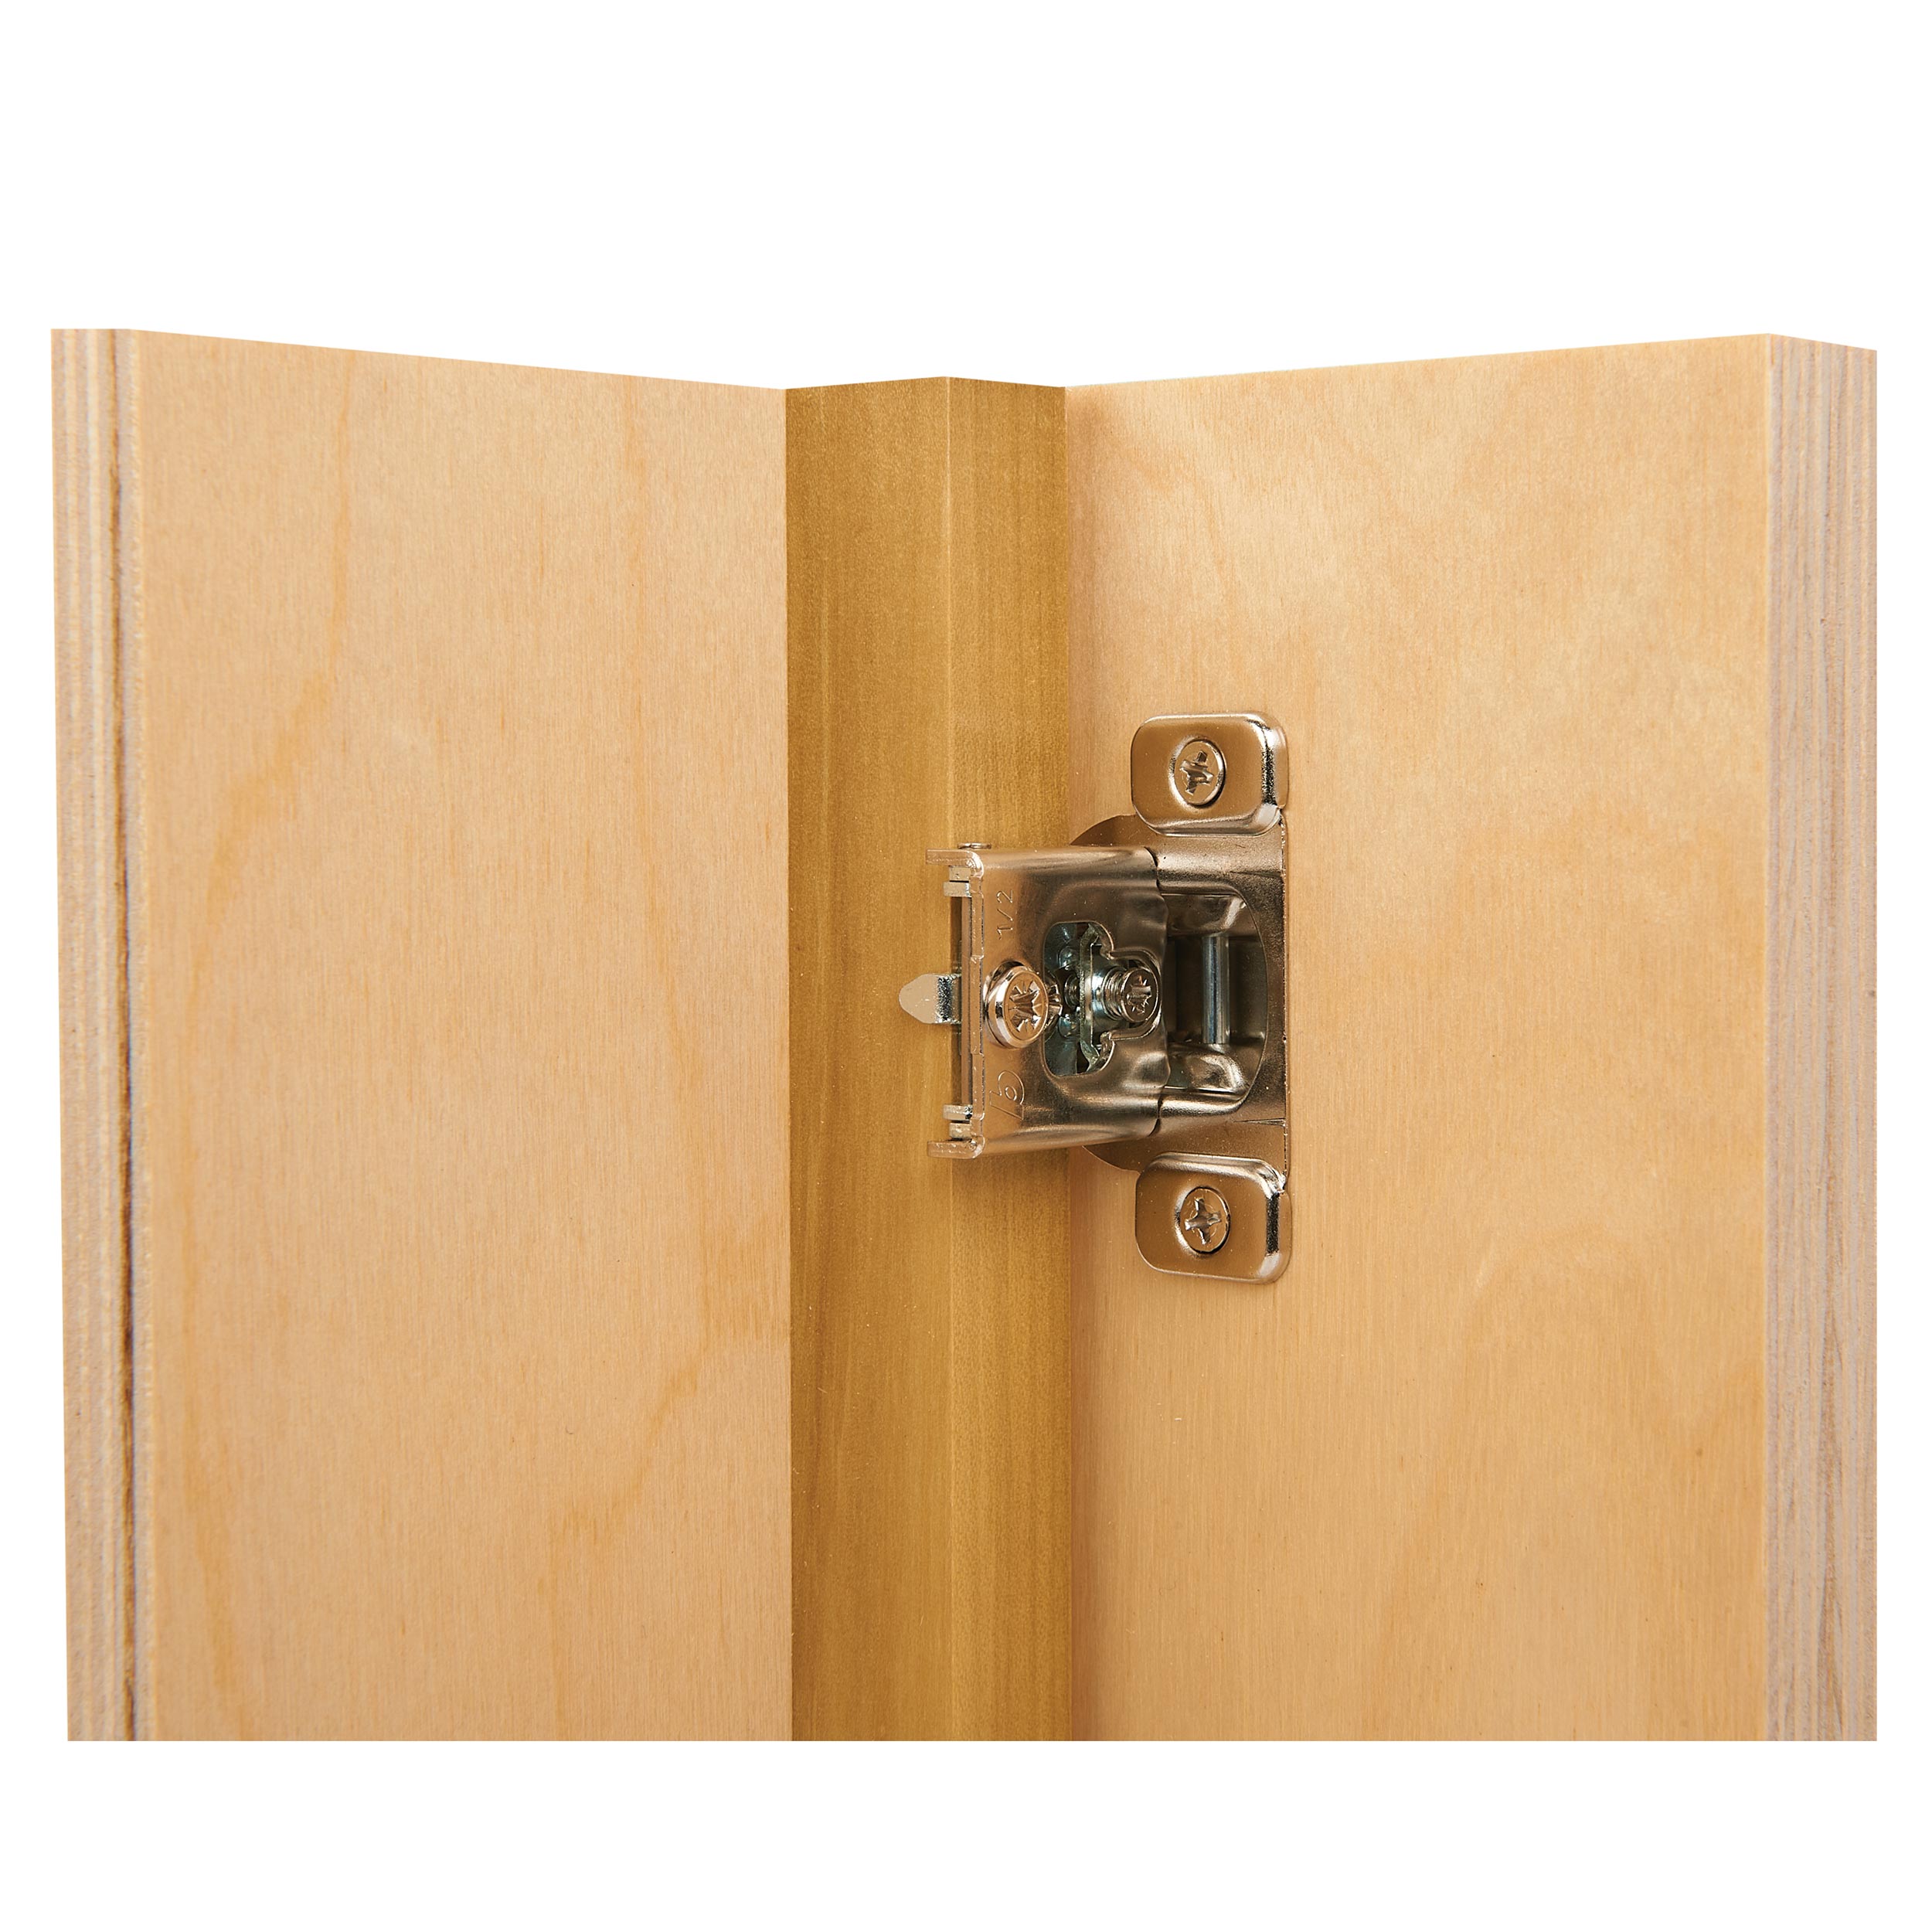 1/2" Face Frame Compact Cabinet Hinge, 2 Pack